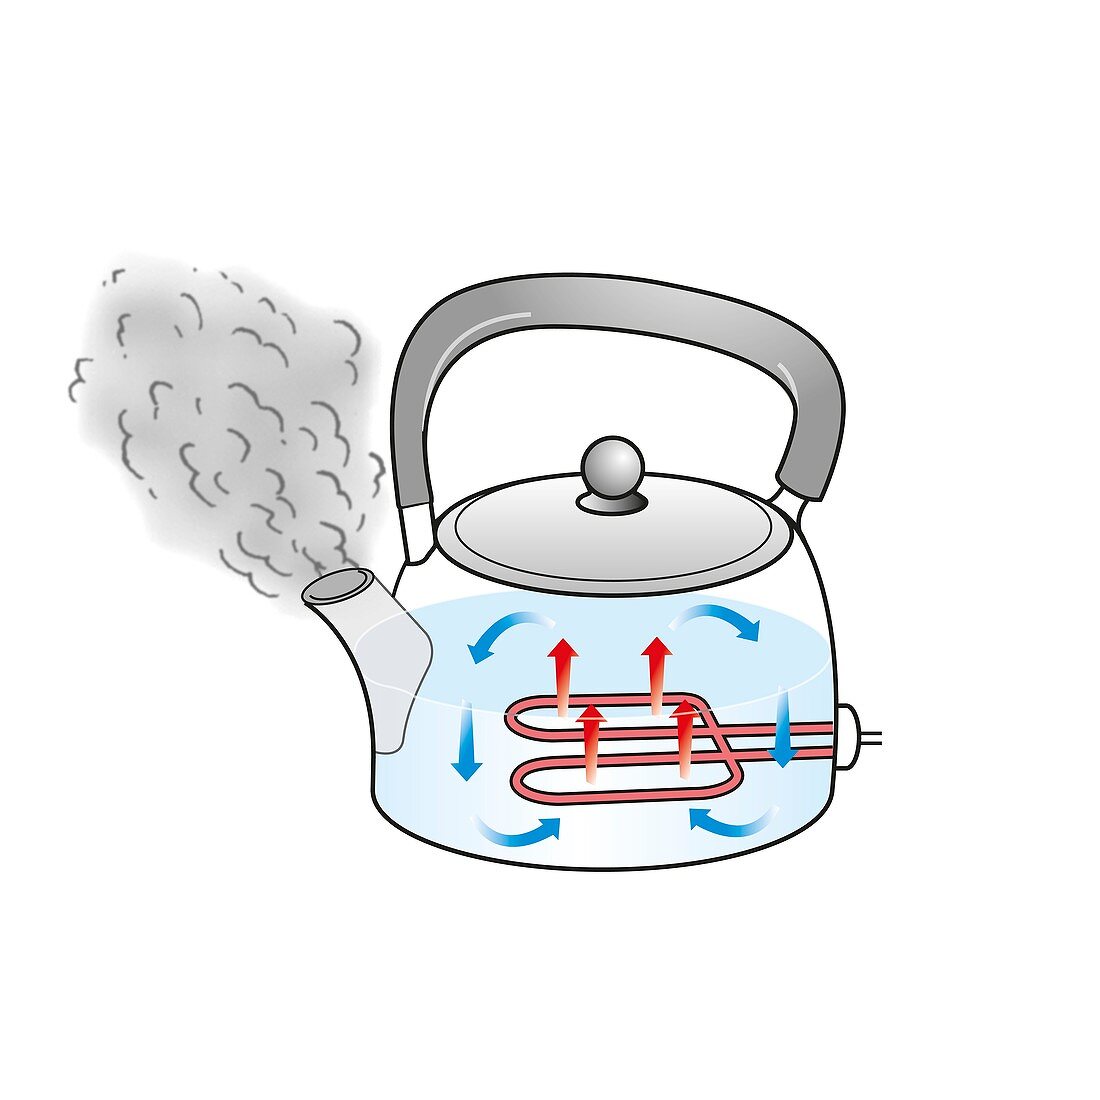 Convection currents in a kettle, illustration